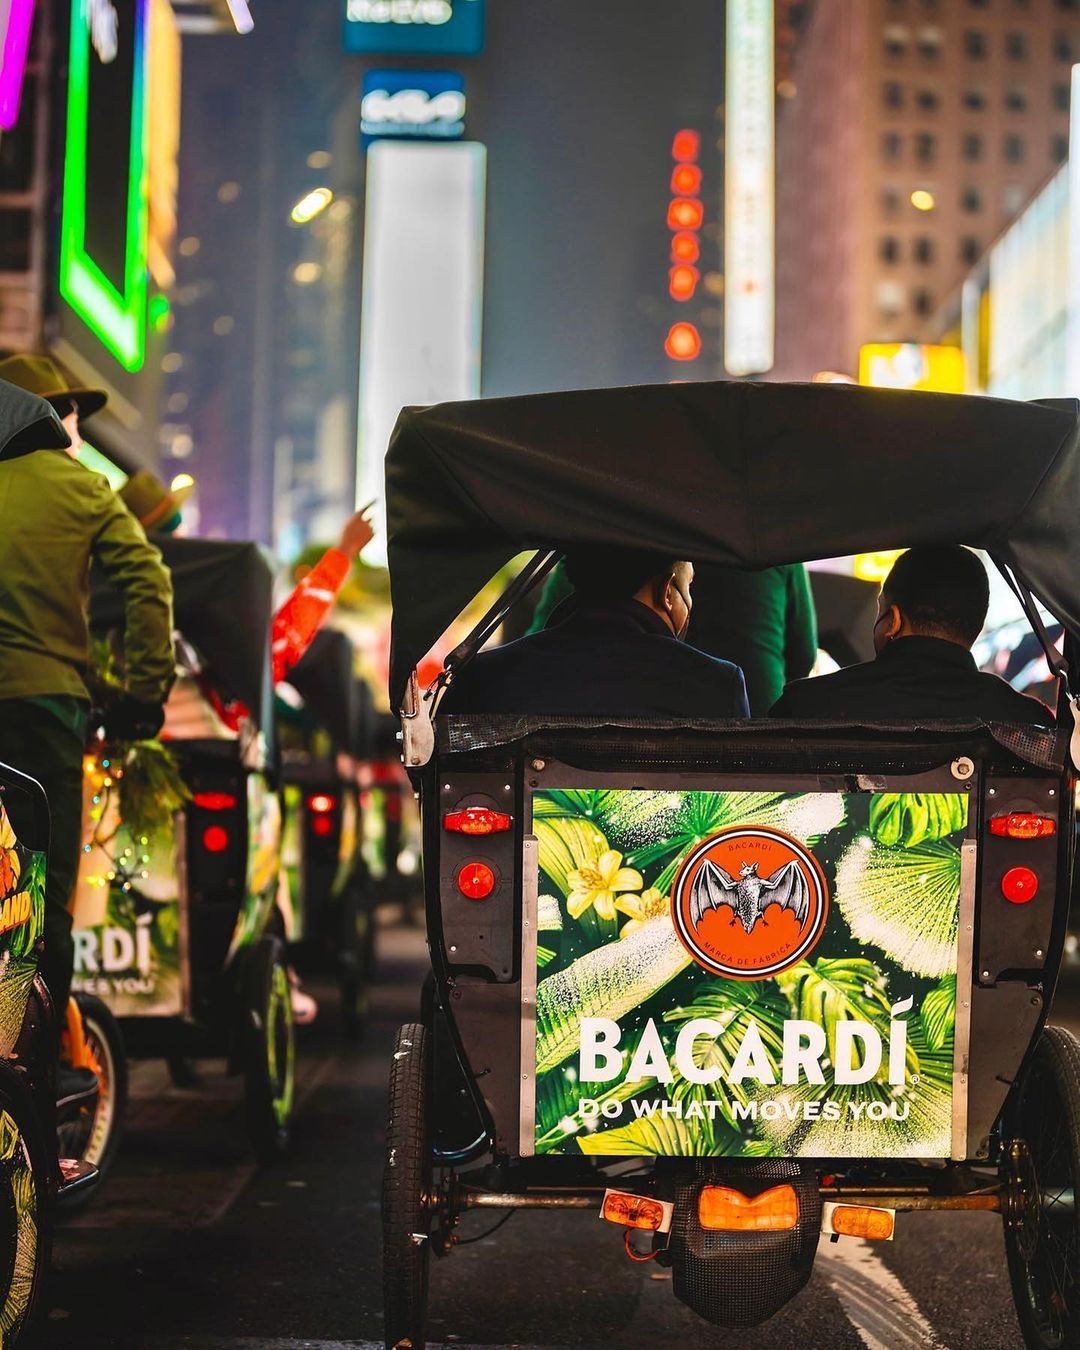 Bacardi Winter Summerland Campaign Experiential Marketing Activation